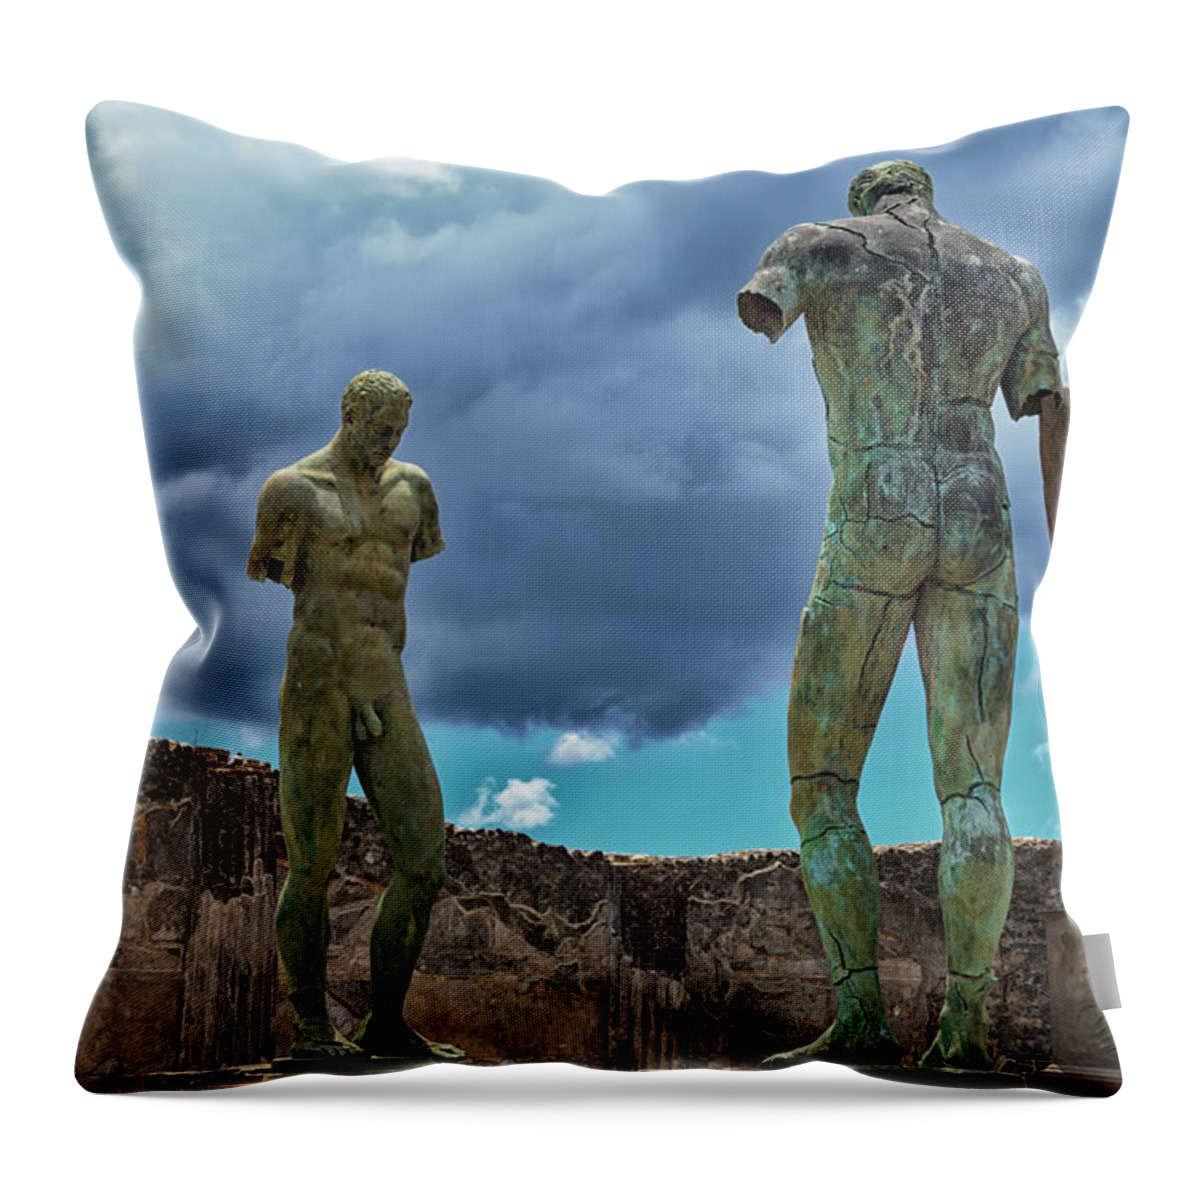 Amidst Throw Pillow featuring the photograph Modern Pompeii Art by Travis Rogers